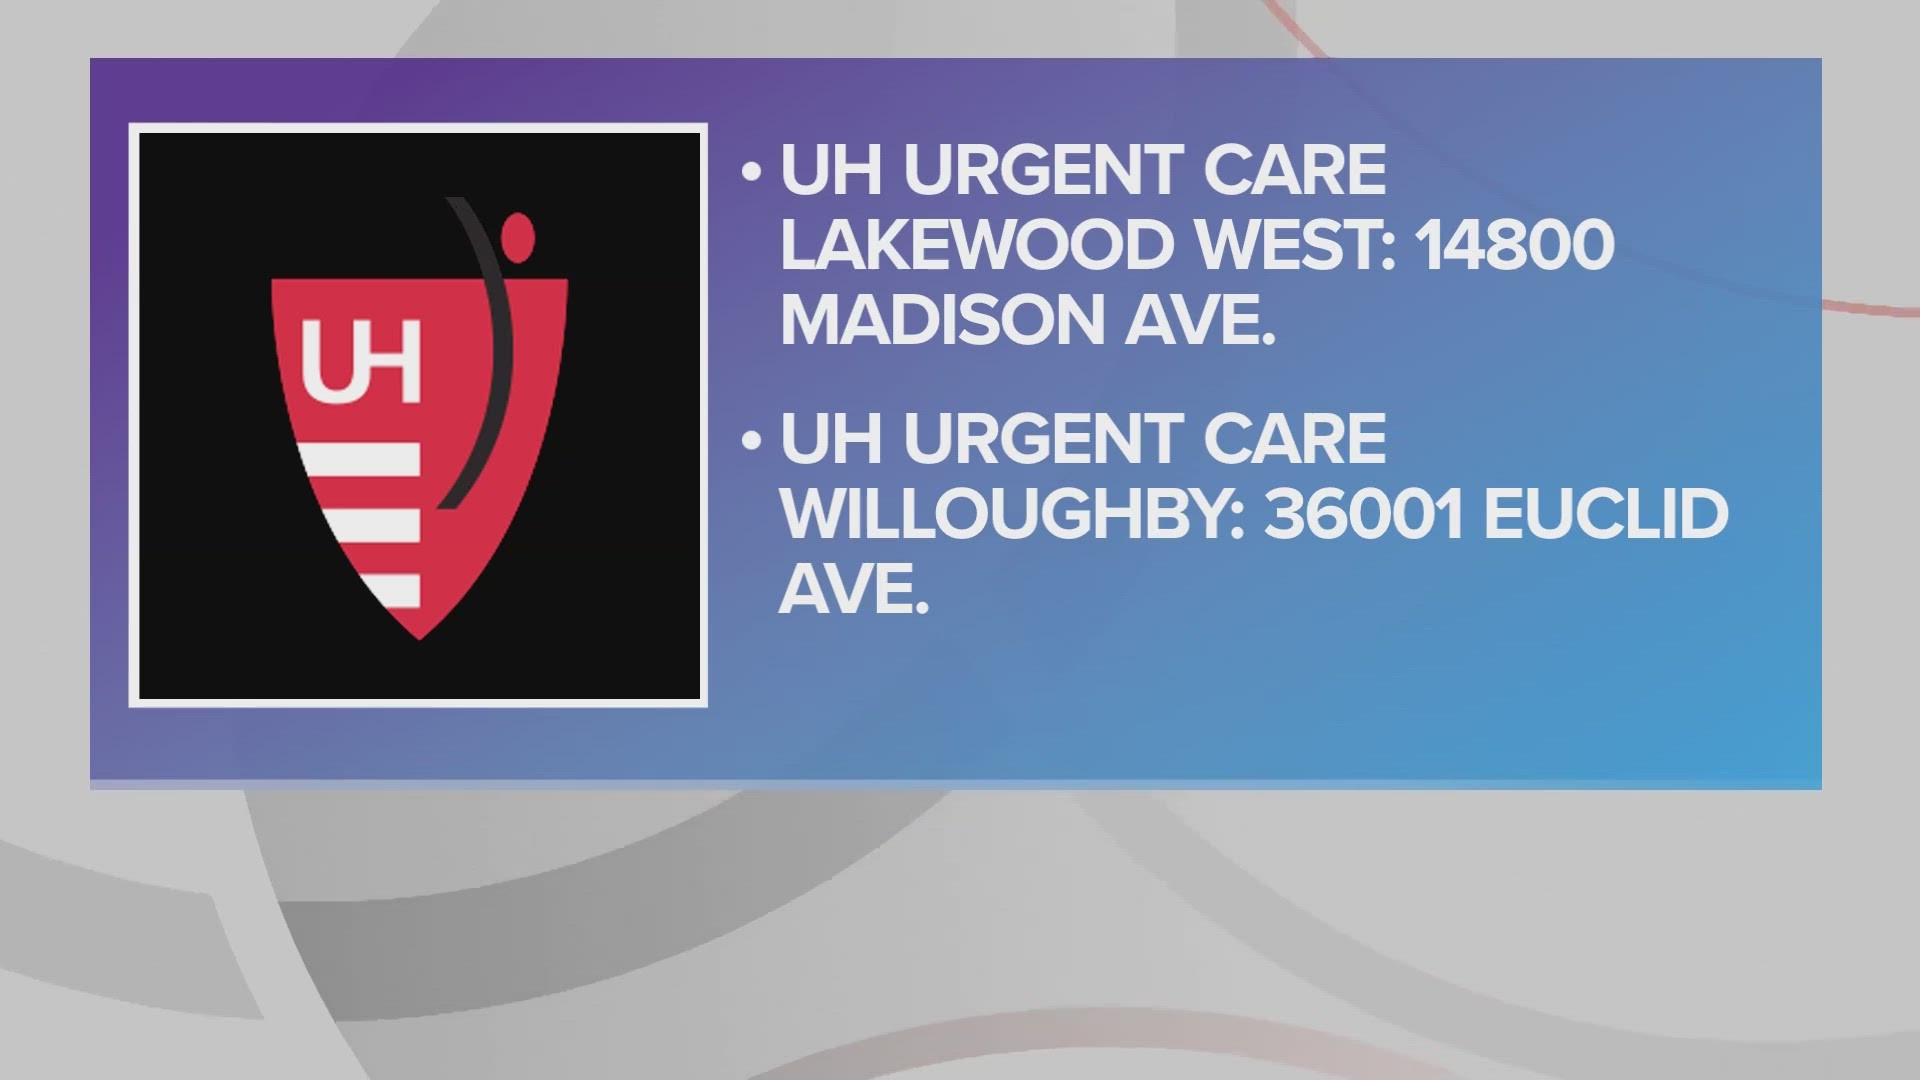 The new Willoughby location replaces UH Urgent Care Willowick, which will be moved from 29804 Lakeshore Blvd.